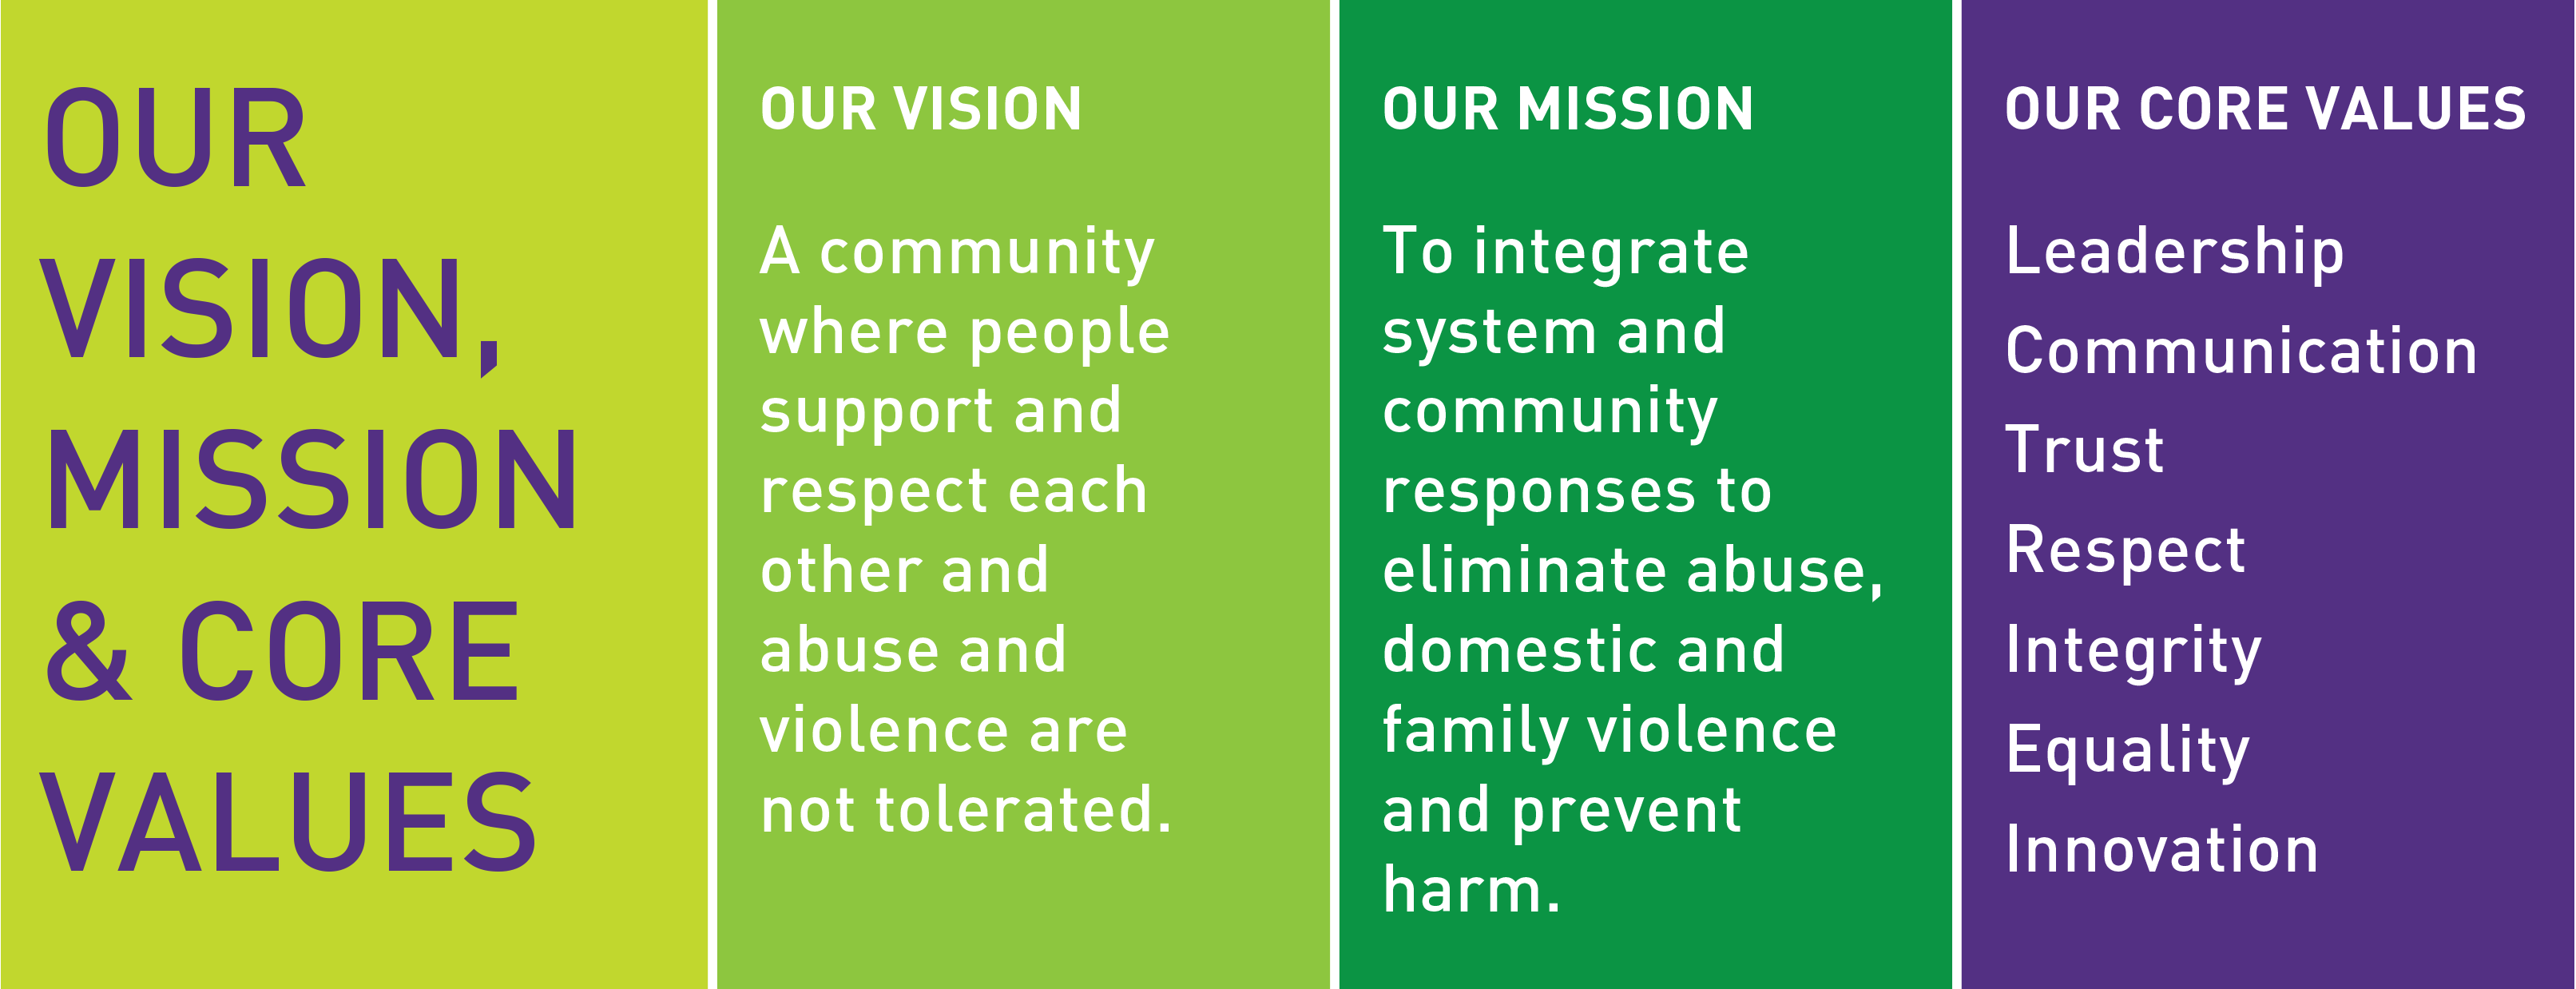 Our vision, mission and core values